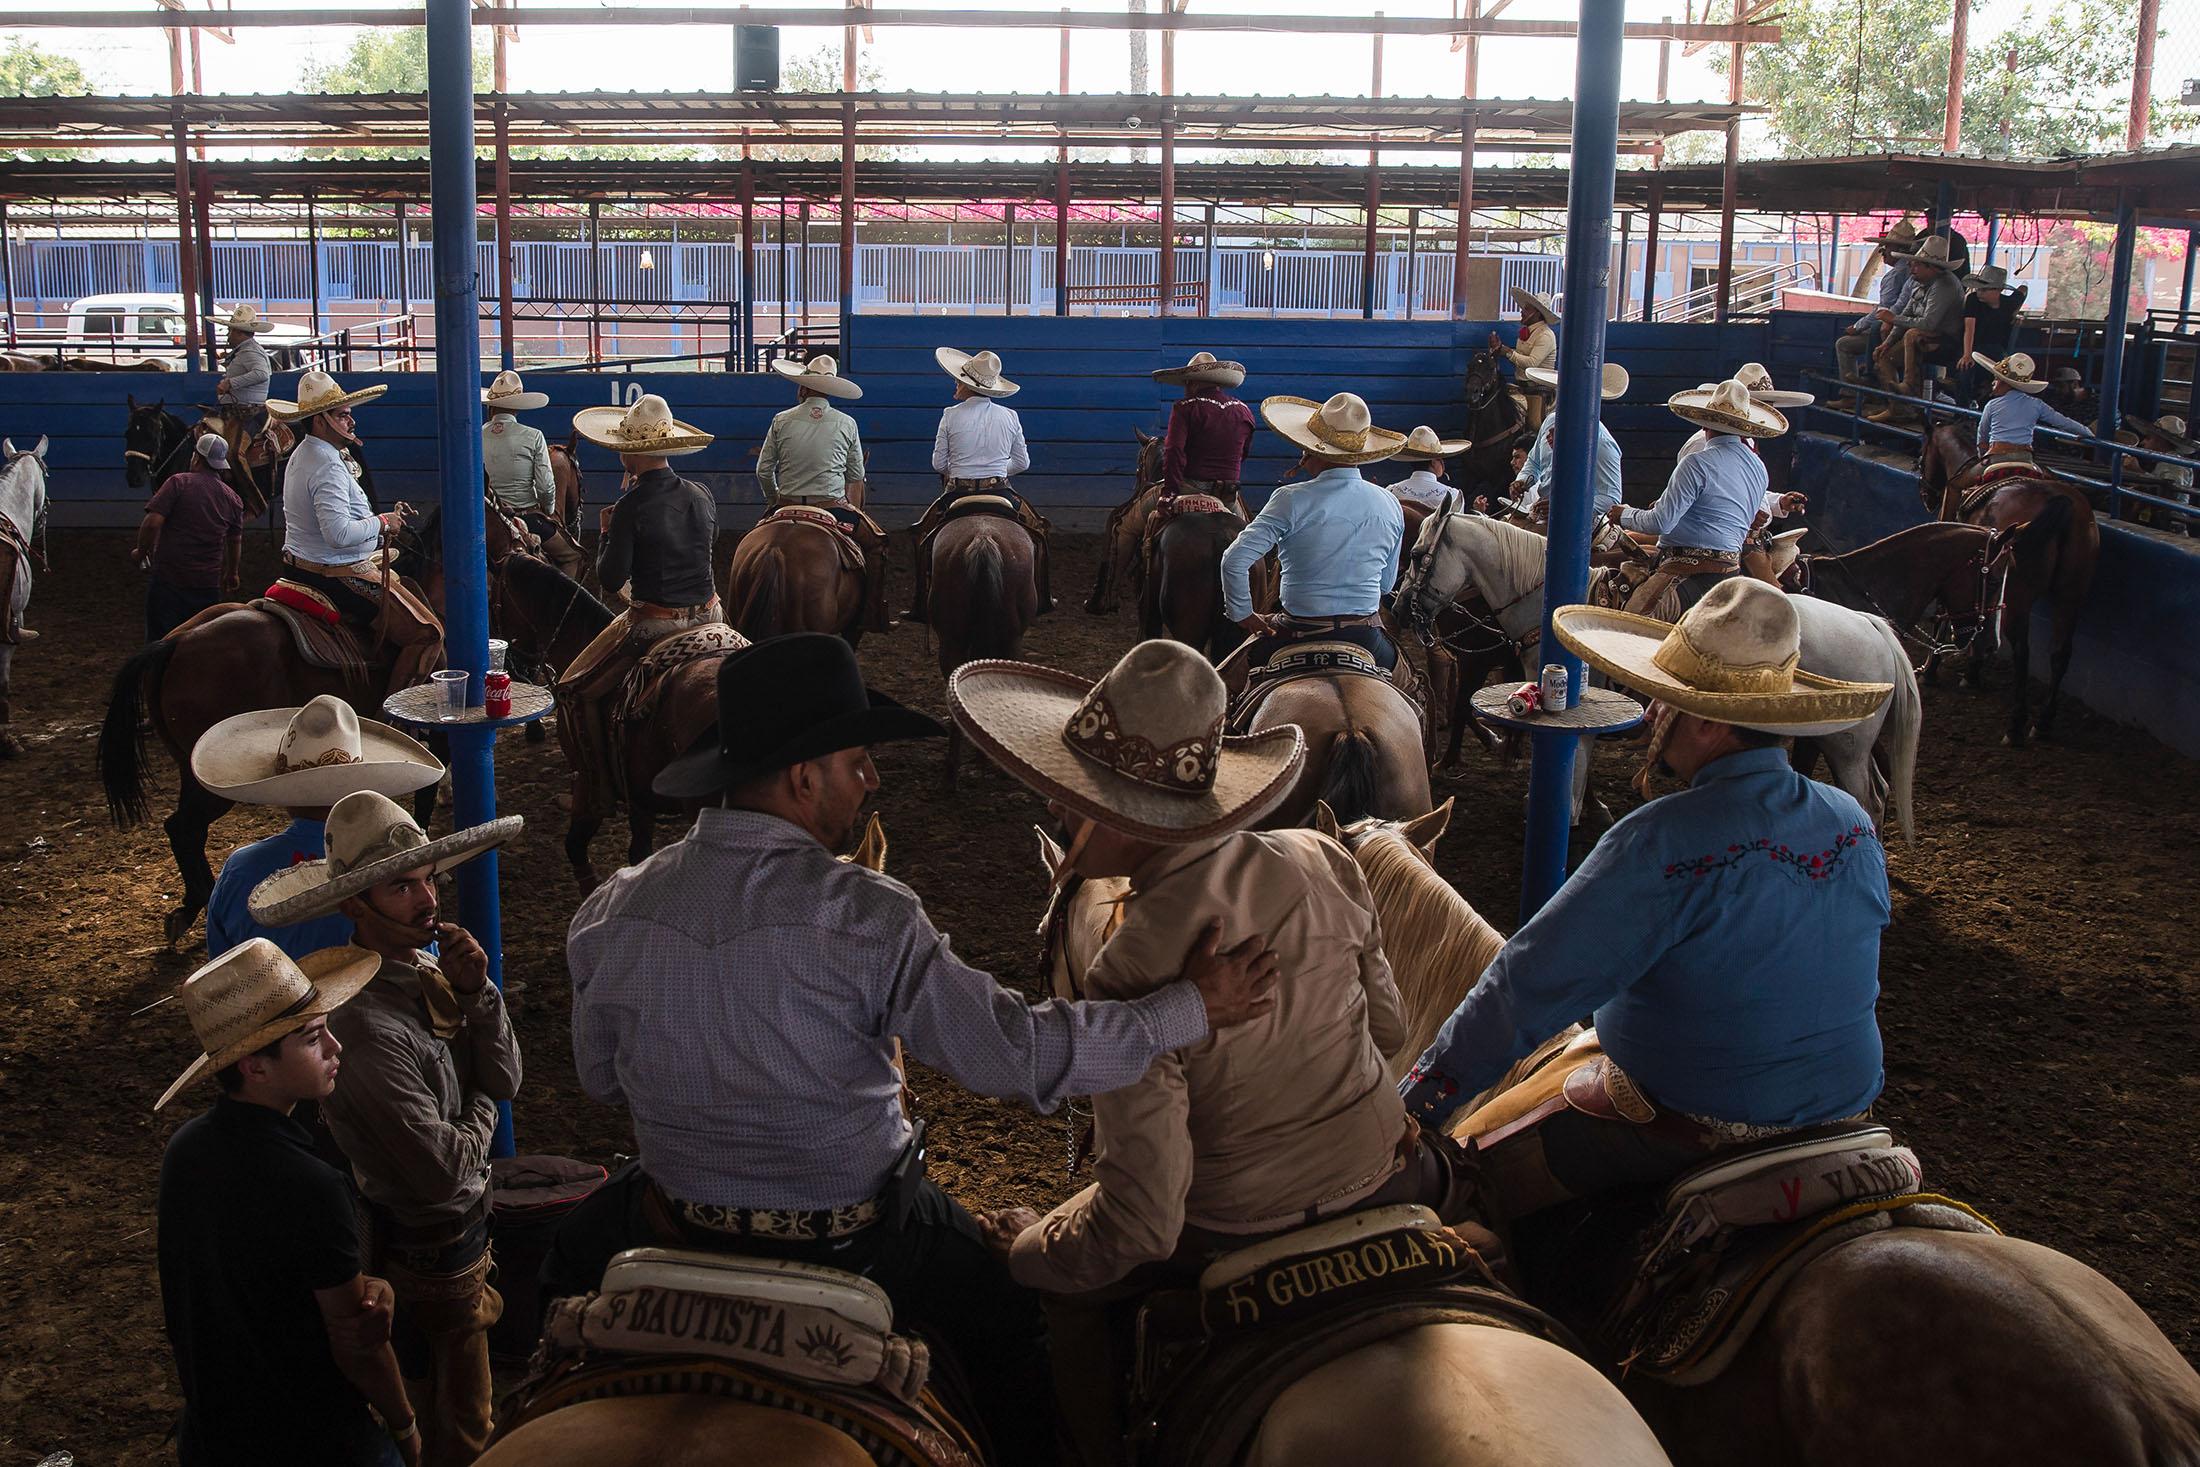 Participants during a charrer&iacute;a competition on July 16, 2021 in Pico Rivera, California.